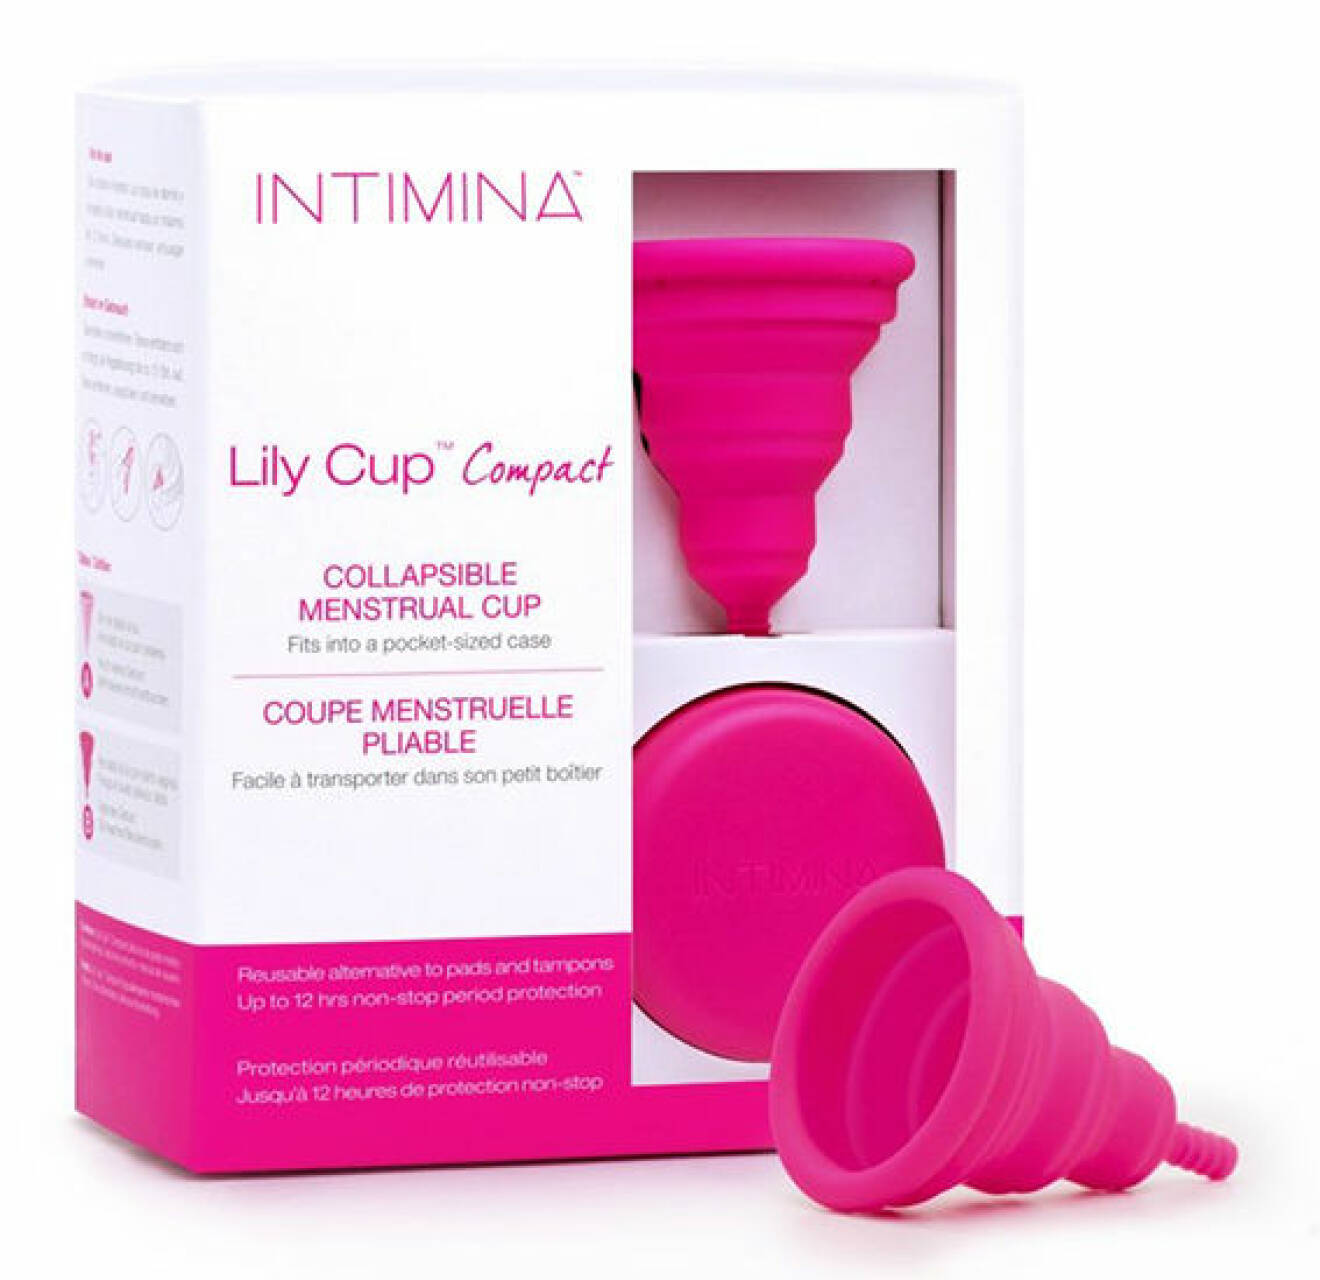 Intimina Lily Cup One Menskopp.